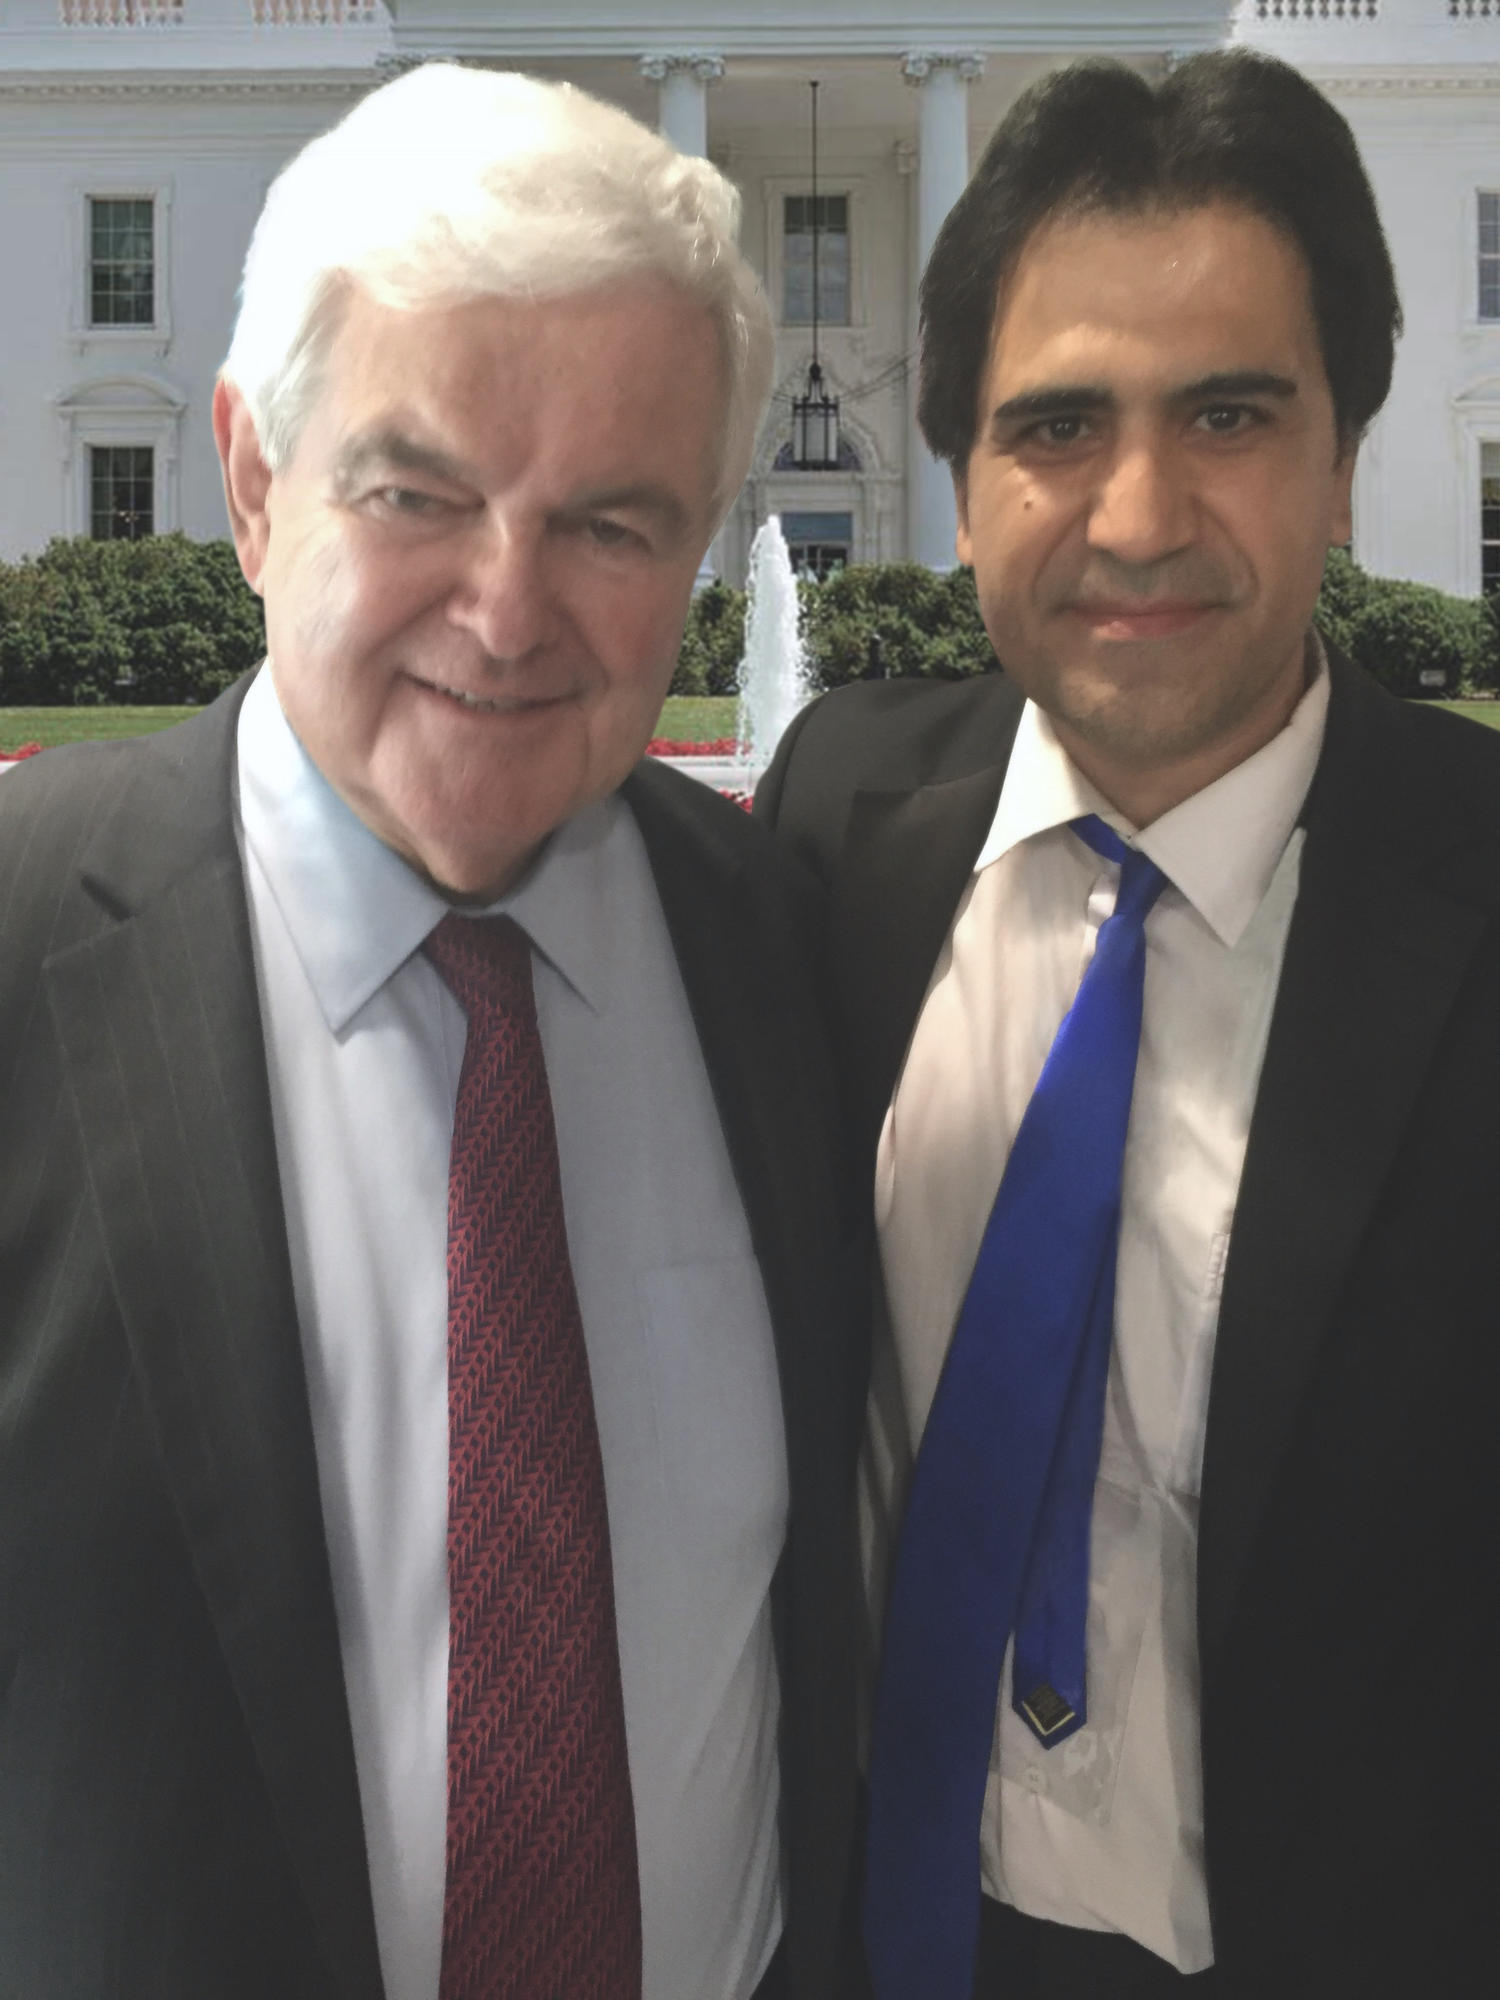 On the US and Middle East policies, Newt Gingrich, 50th Speaker of the United States House of Representatives and former U.S. presidential candidate